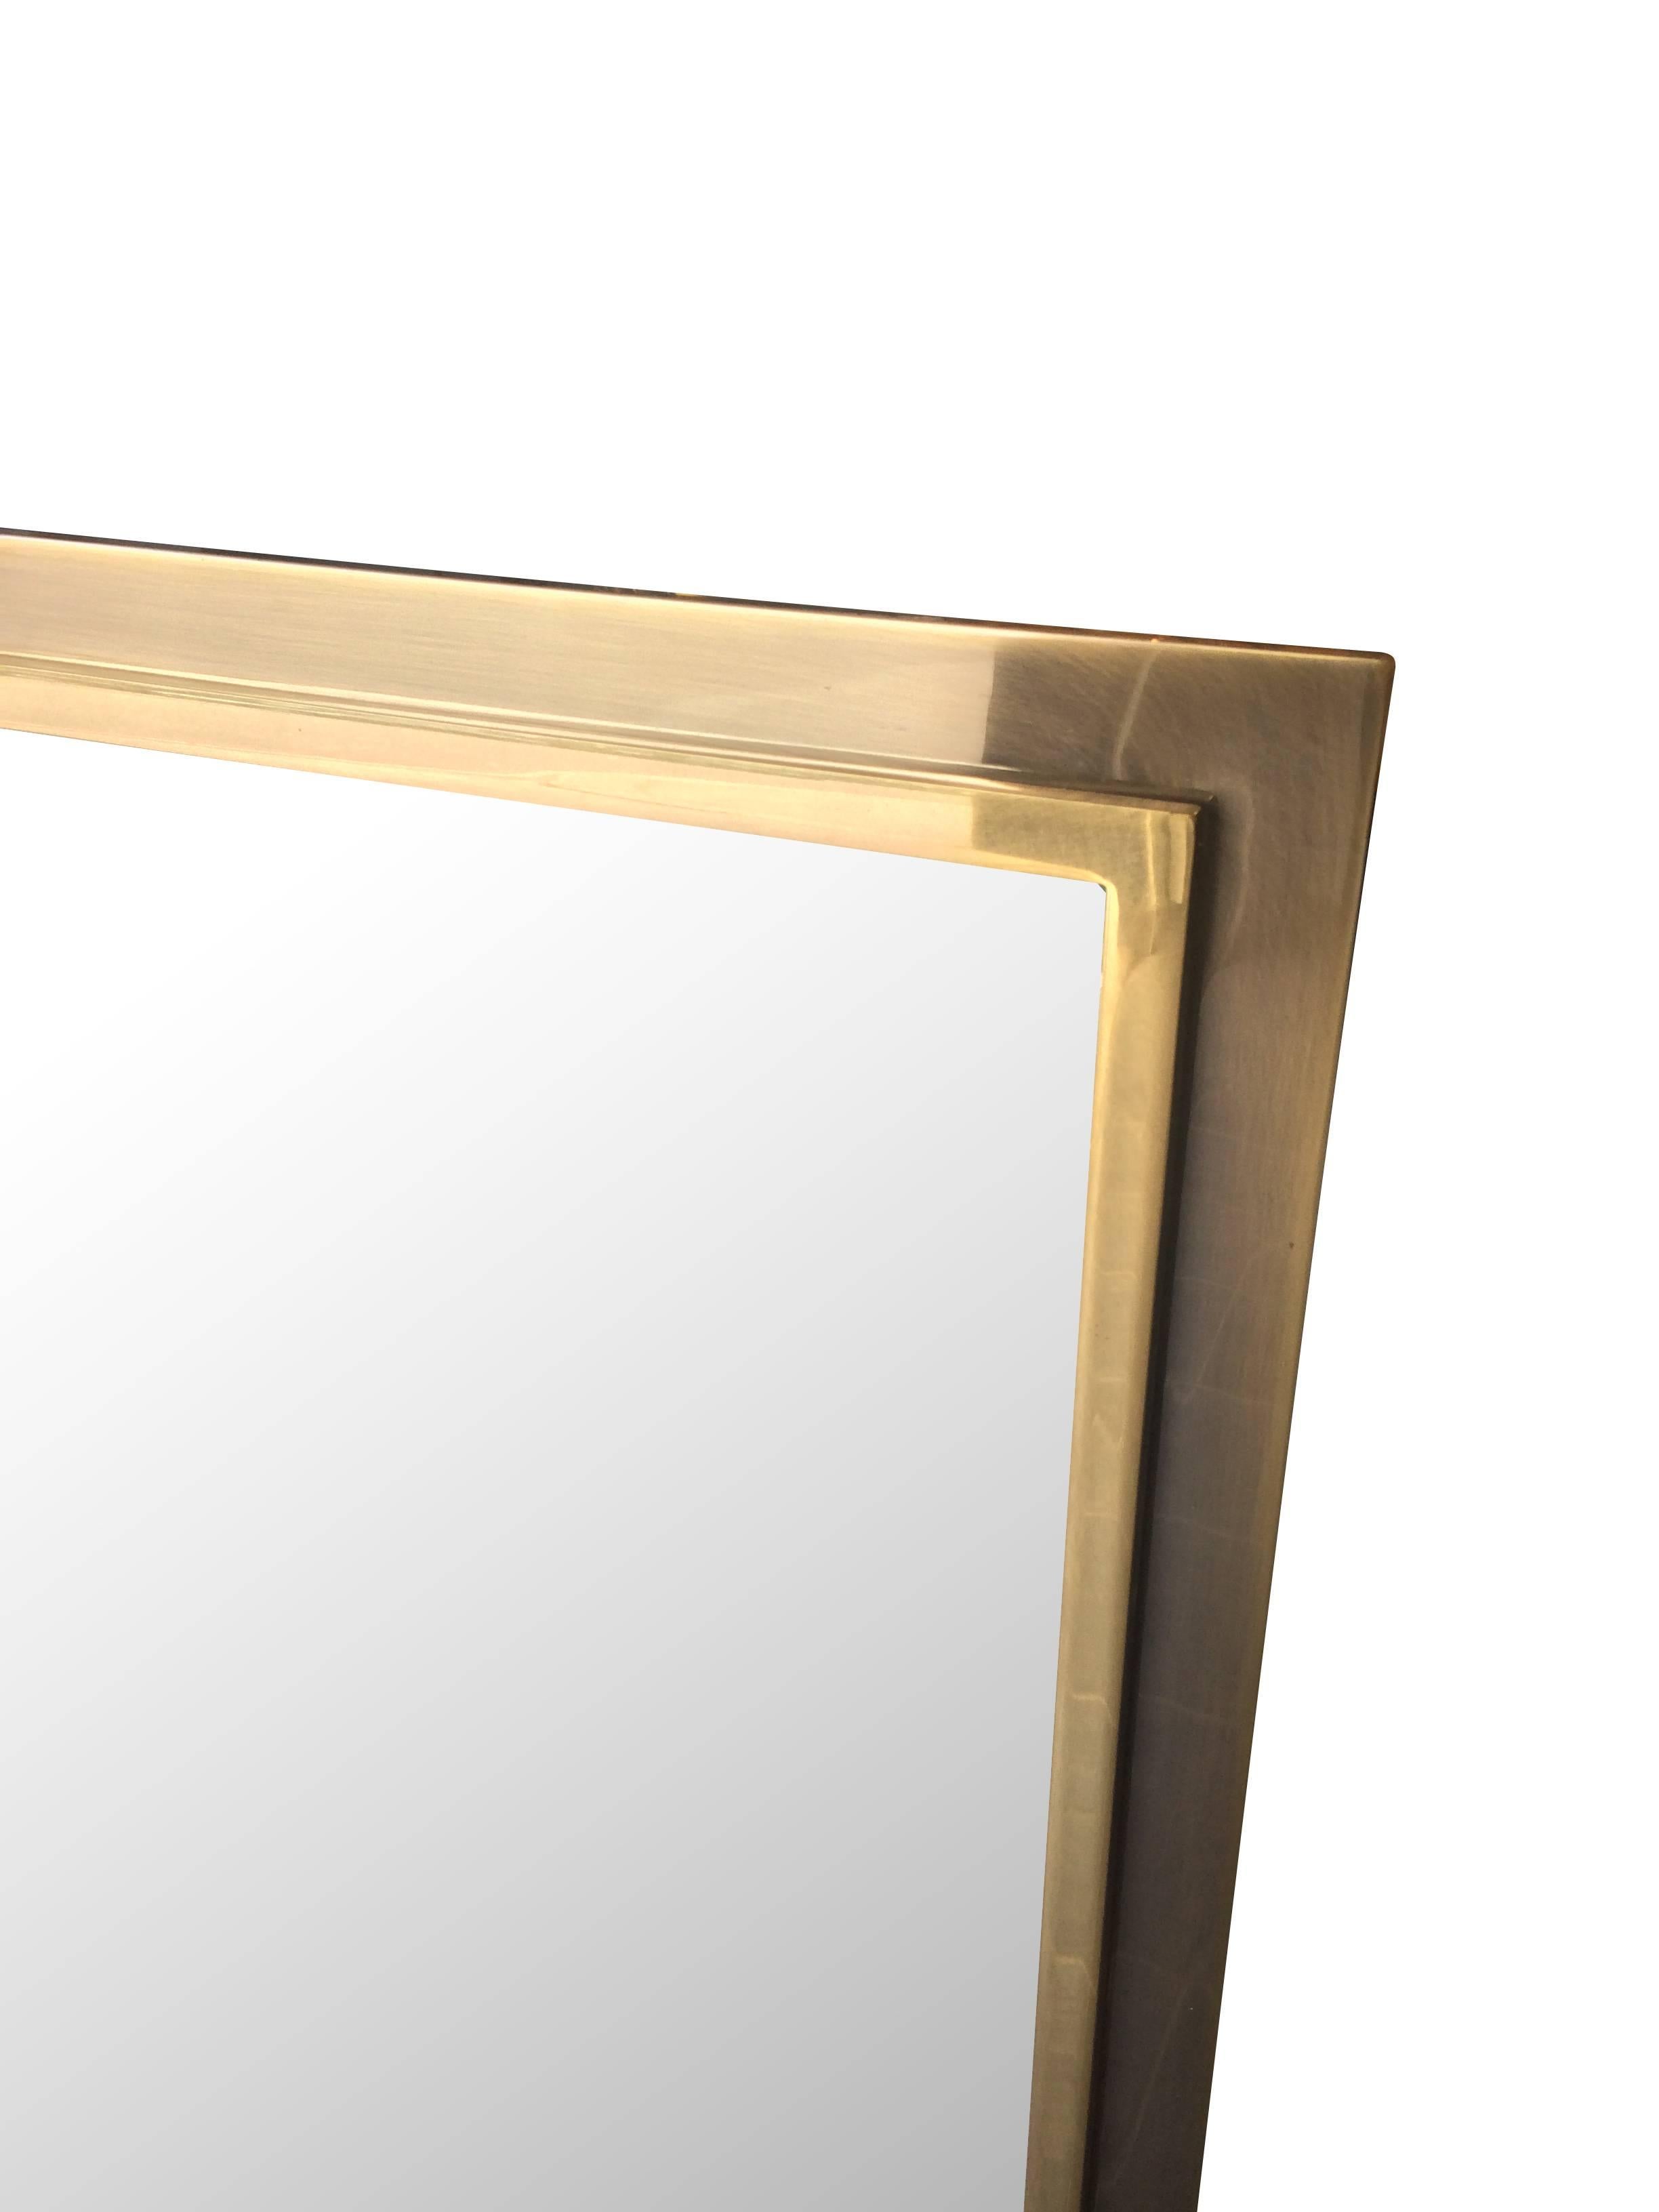 A Belgo chrome mirror with brass and smoked rose brass finished surround. Available with matching Belgo chrome console see other listing.